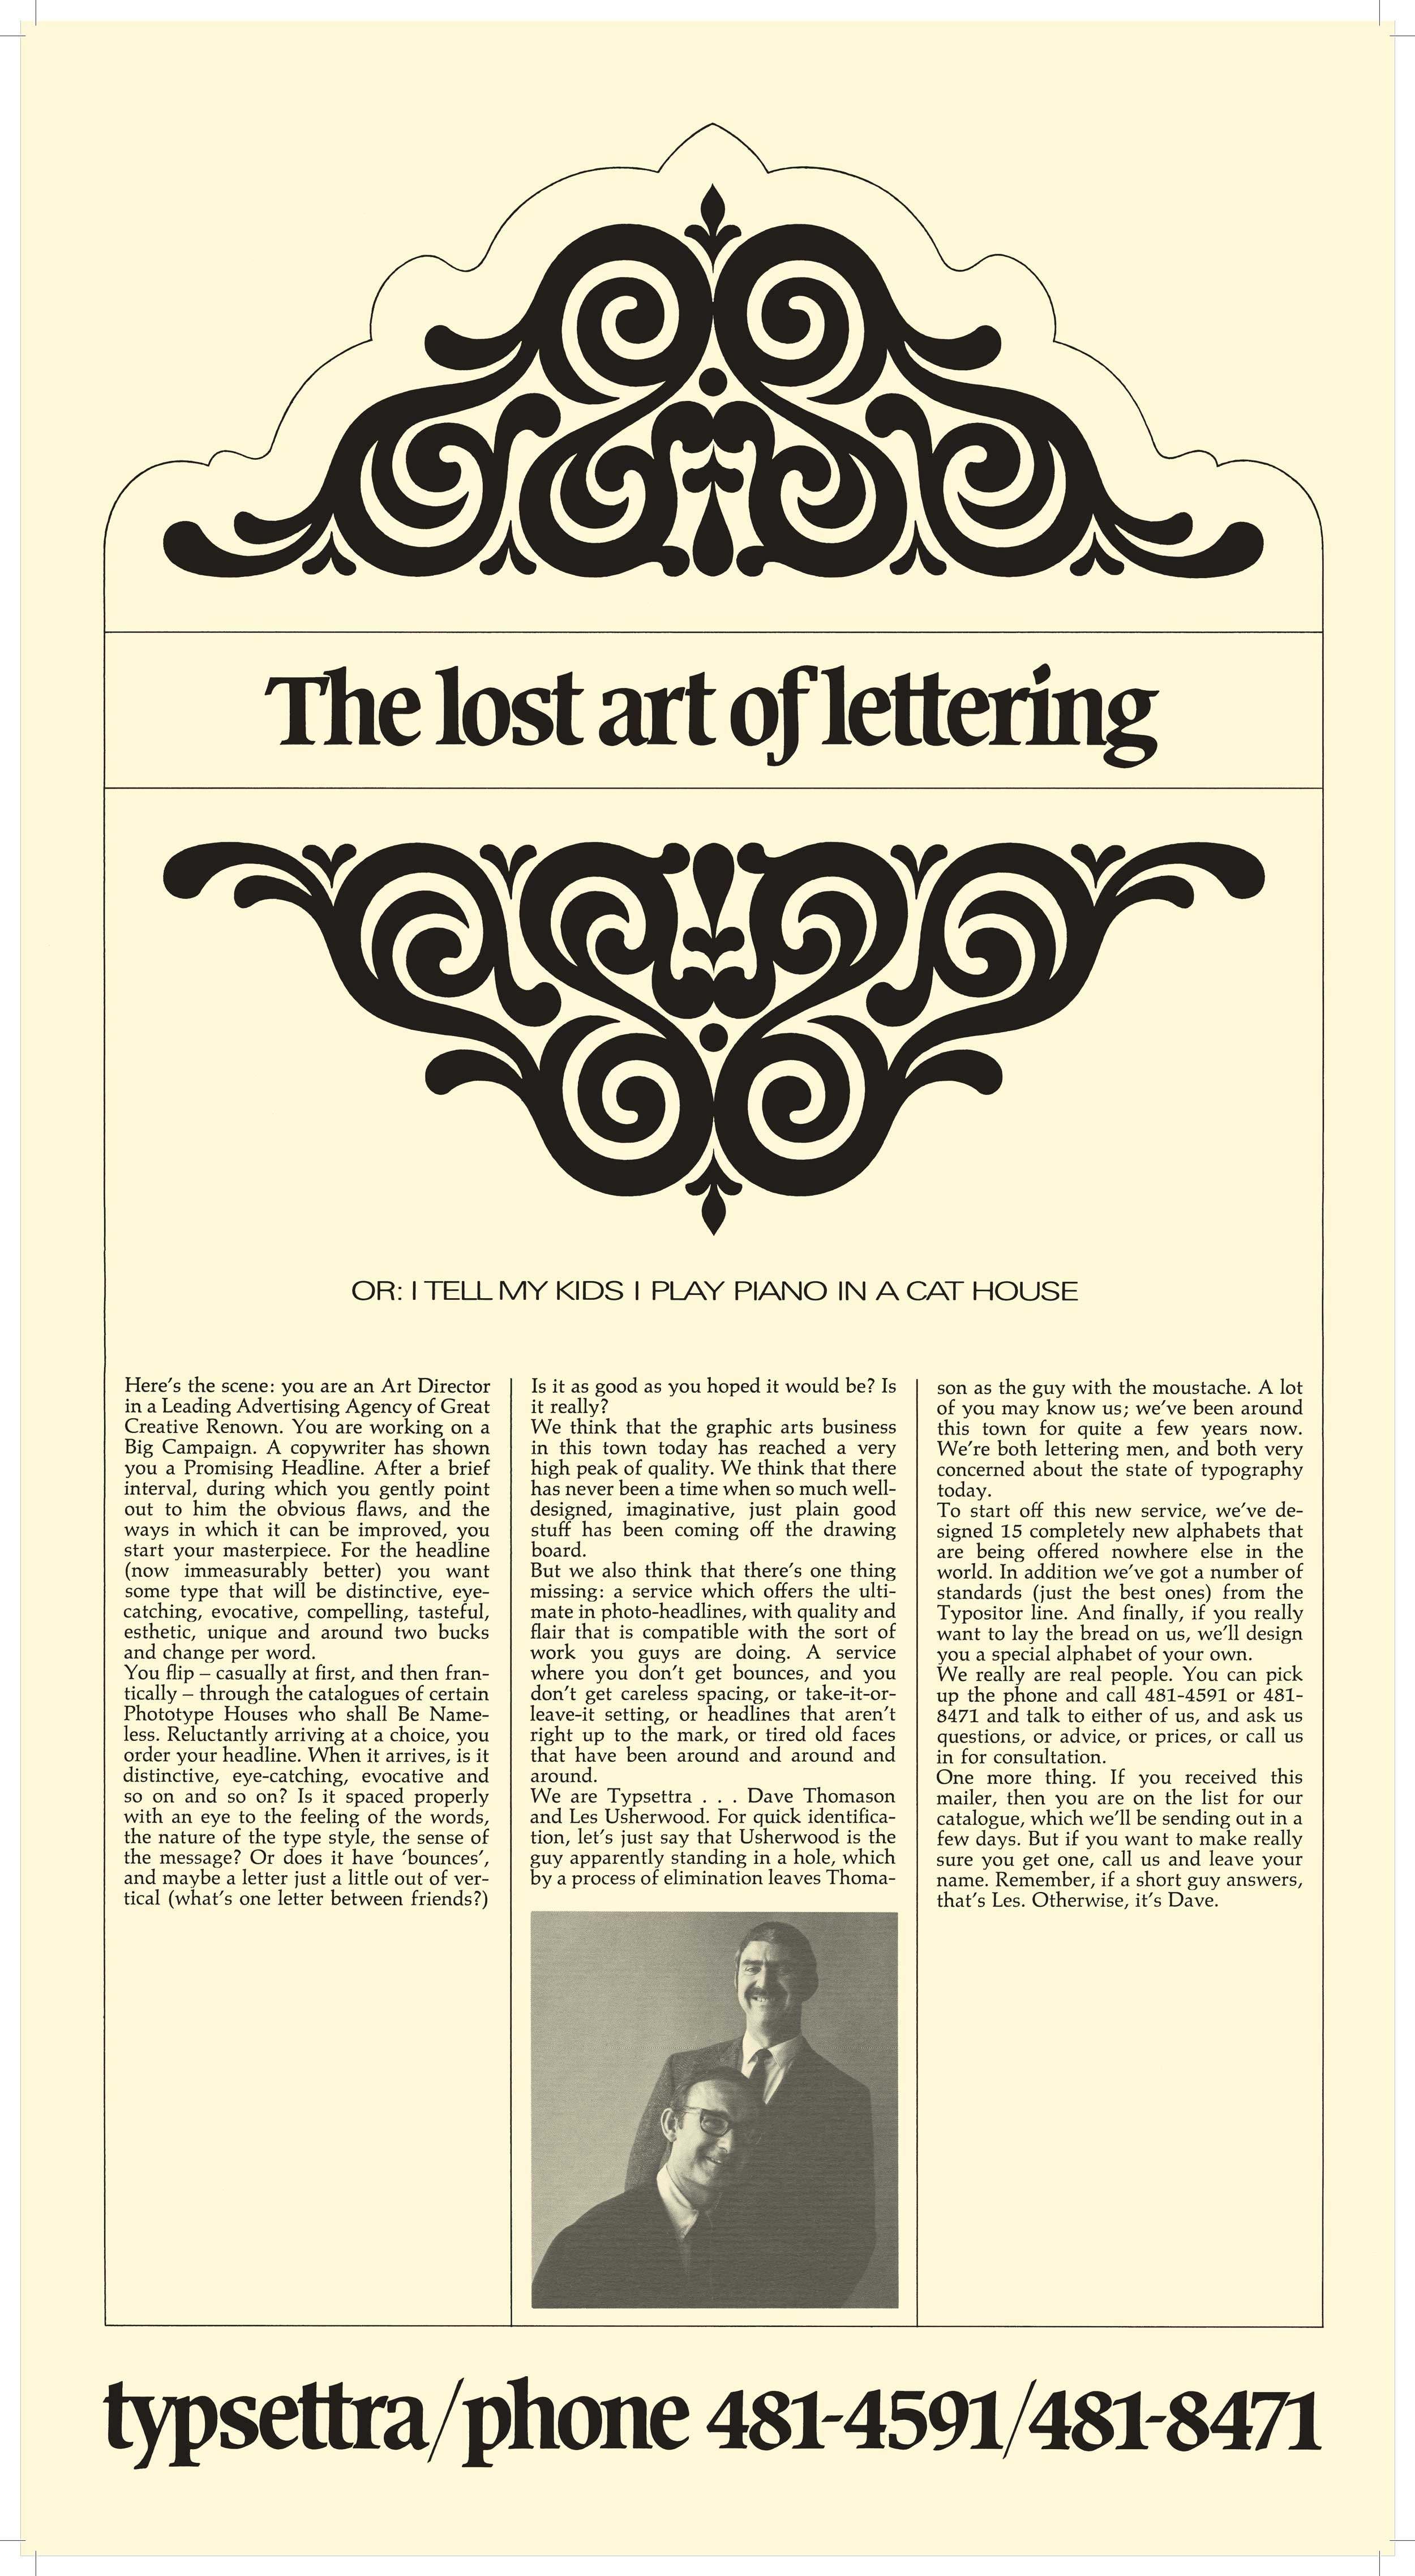    The headline and footer are set in Graphis Bold, one of the fifteen new alphabets created by Typsettra. Graphis was the ‘face’ of the CIBC for roughly three years. The large ornament is typical of a faux nineteenth-century revival design that was 